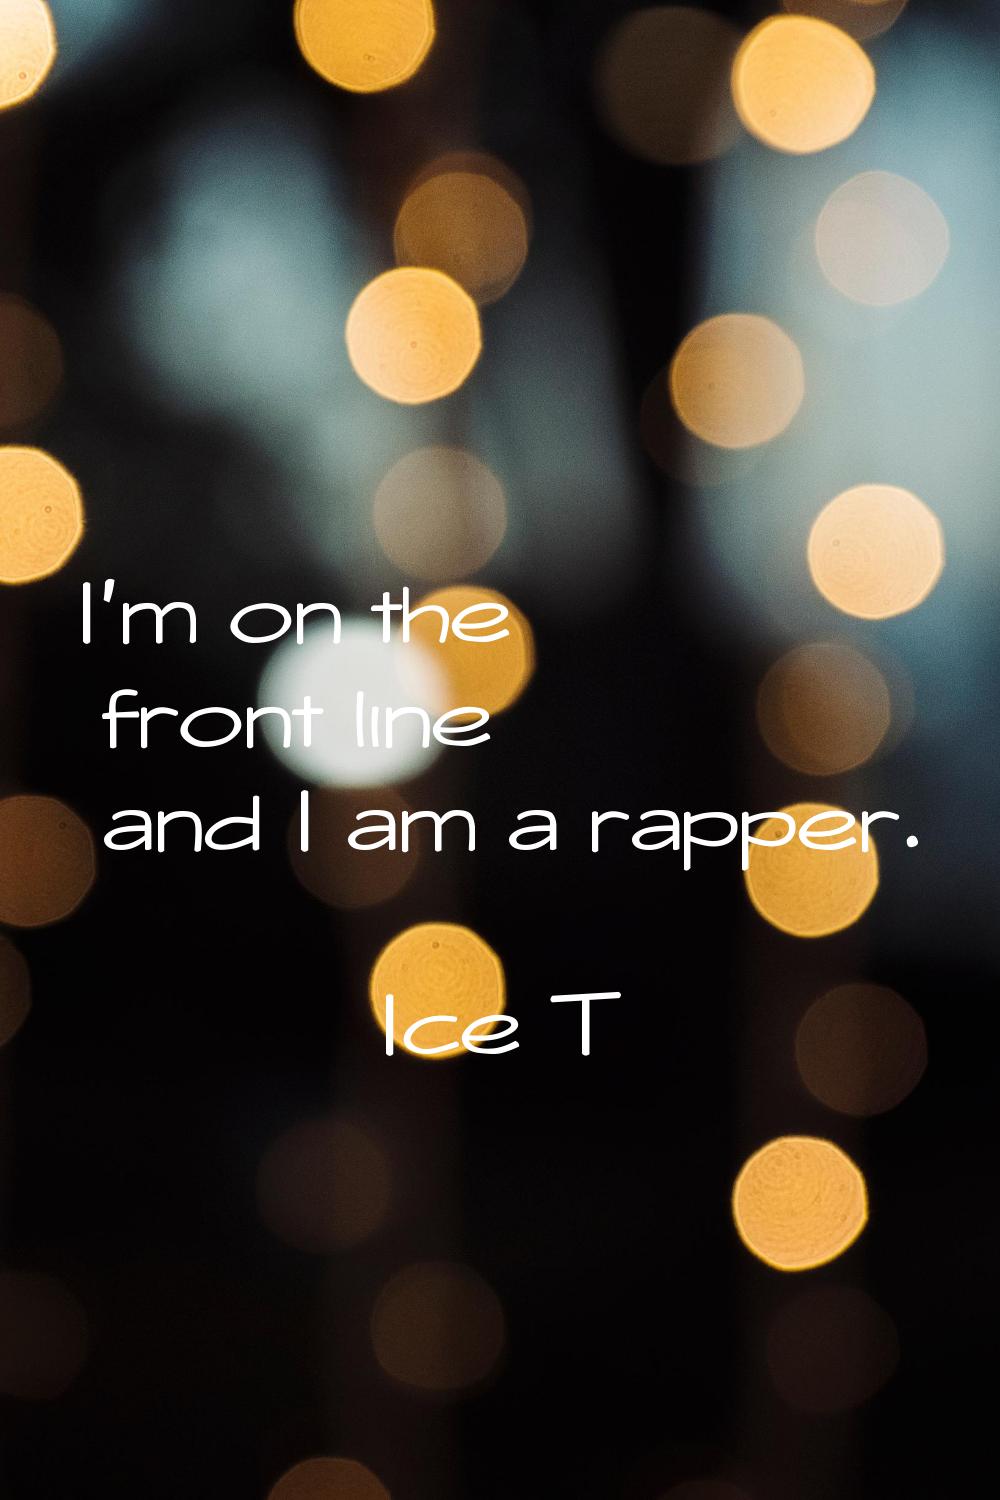 I'm on the front line and I am a rapper.